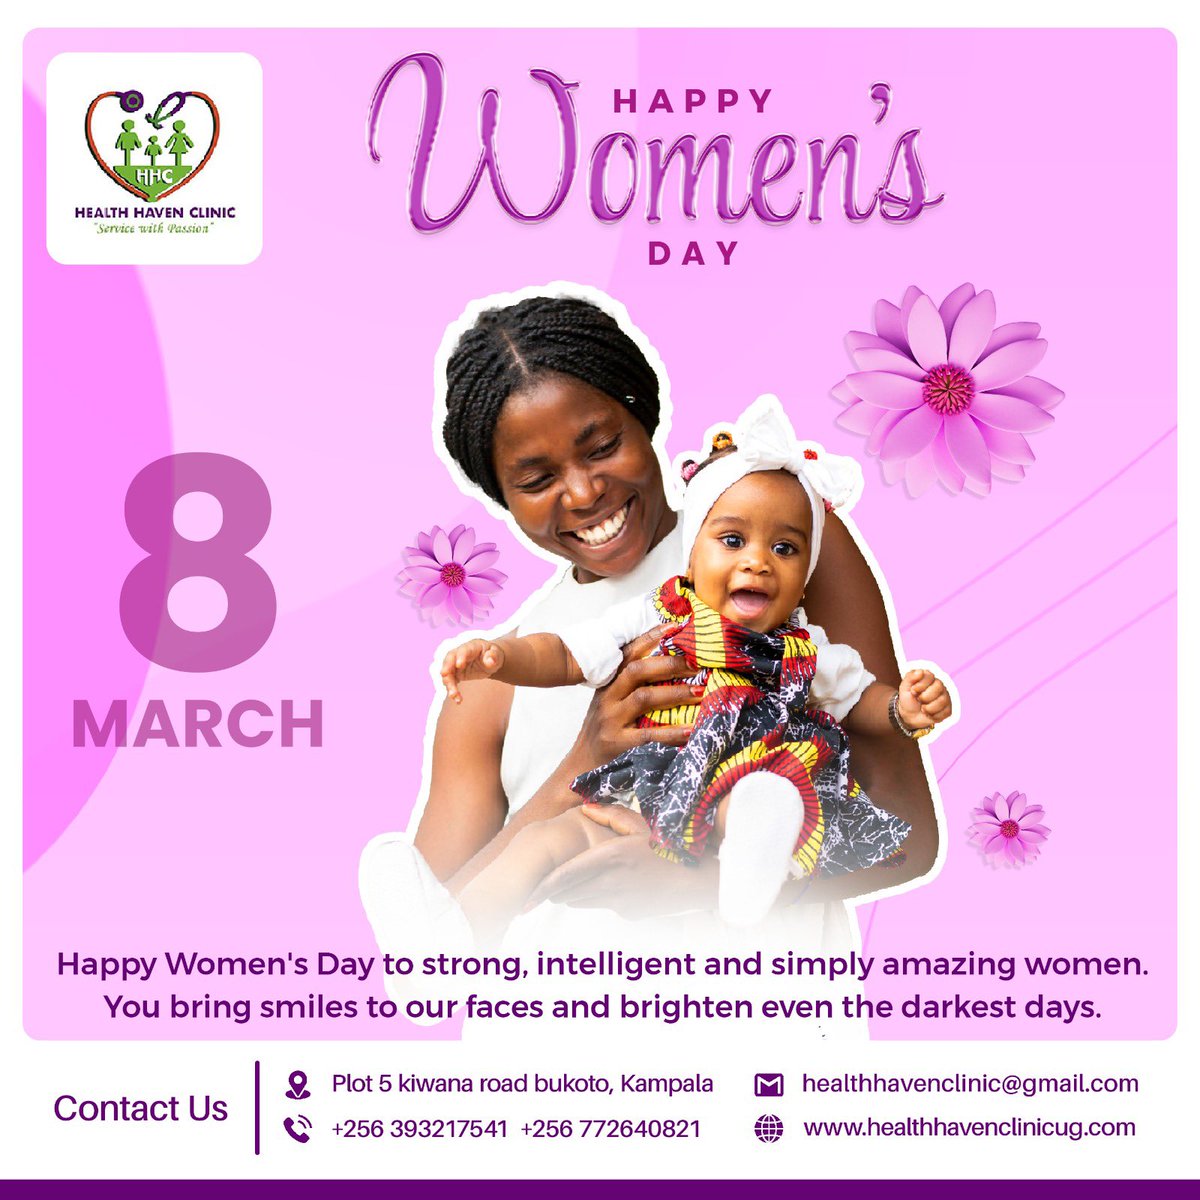 Happy International Women's Day to the heartbeat of our clinic – our amazing women! Your resilience and compassion light up our clinic every day. Here's to celebrating your strength and achievements today and every day. #InternationalWomensDay #HealthHavenHeroes 💐✨